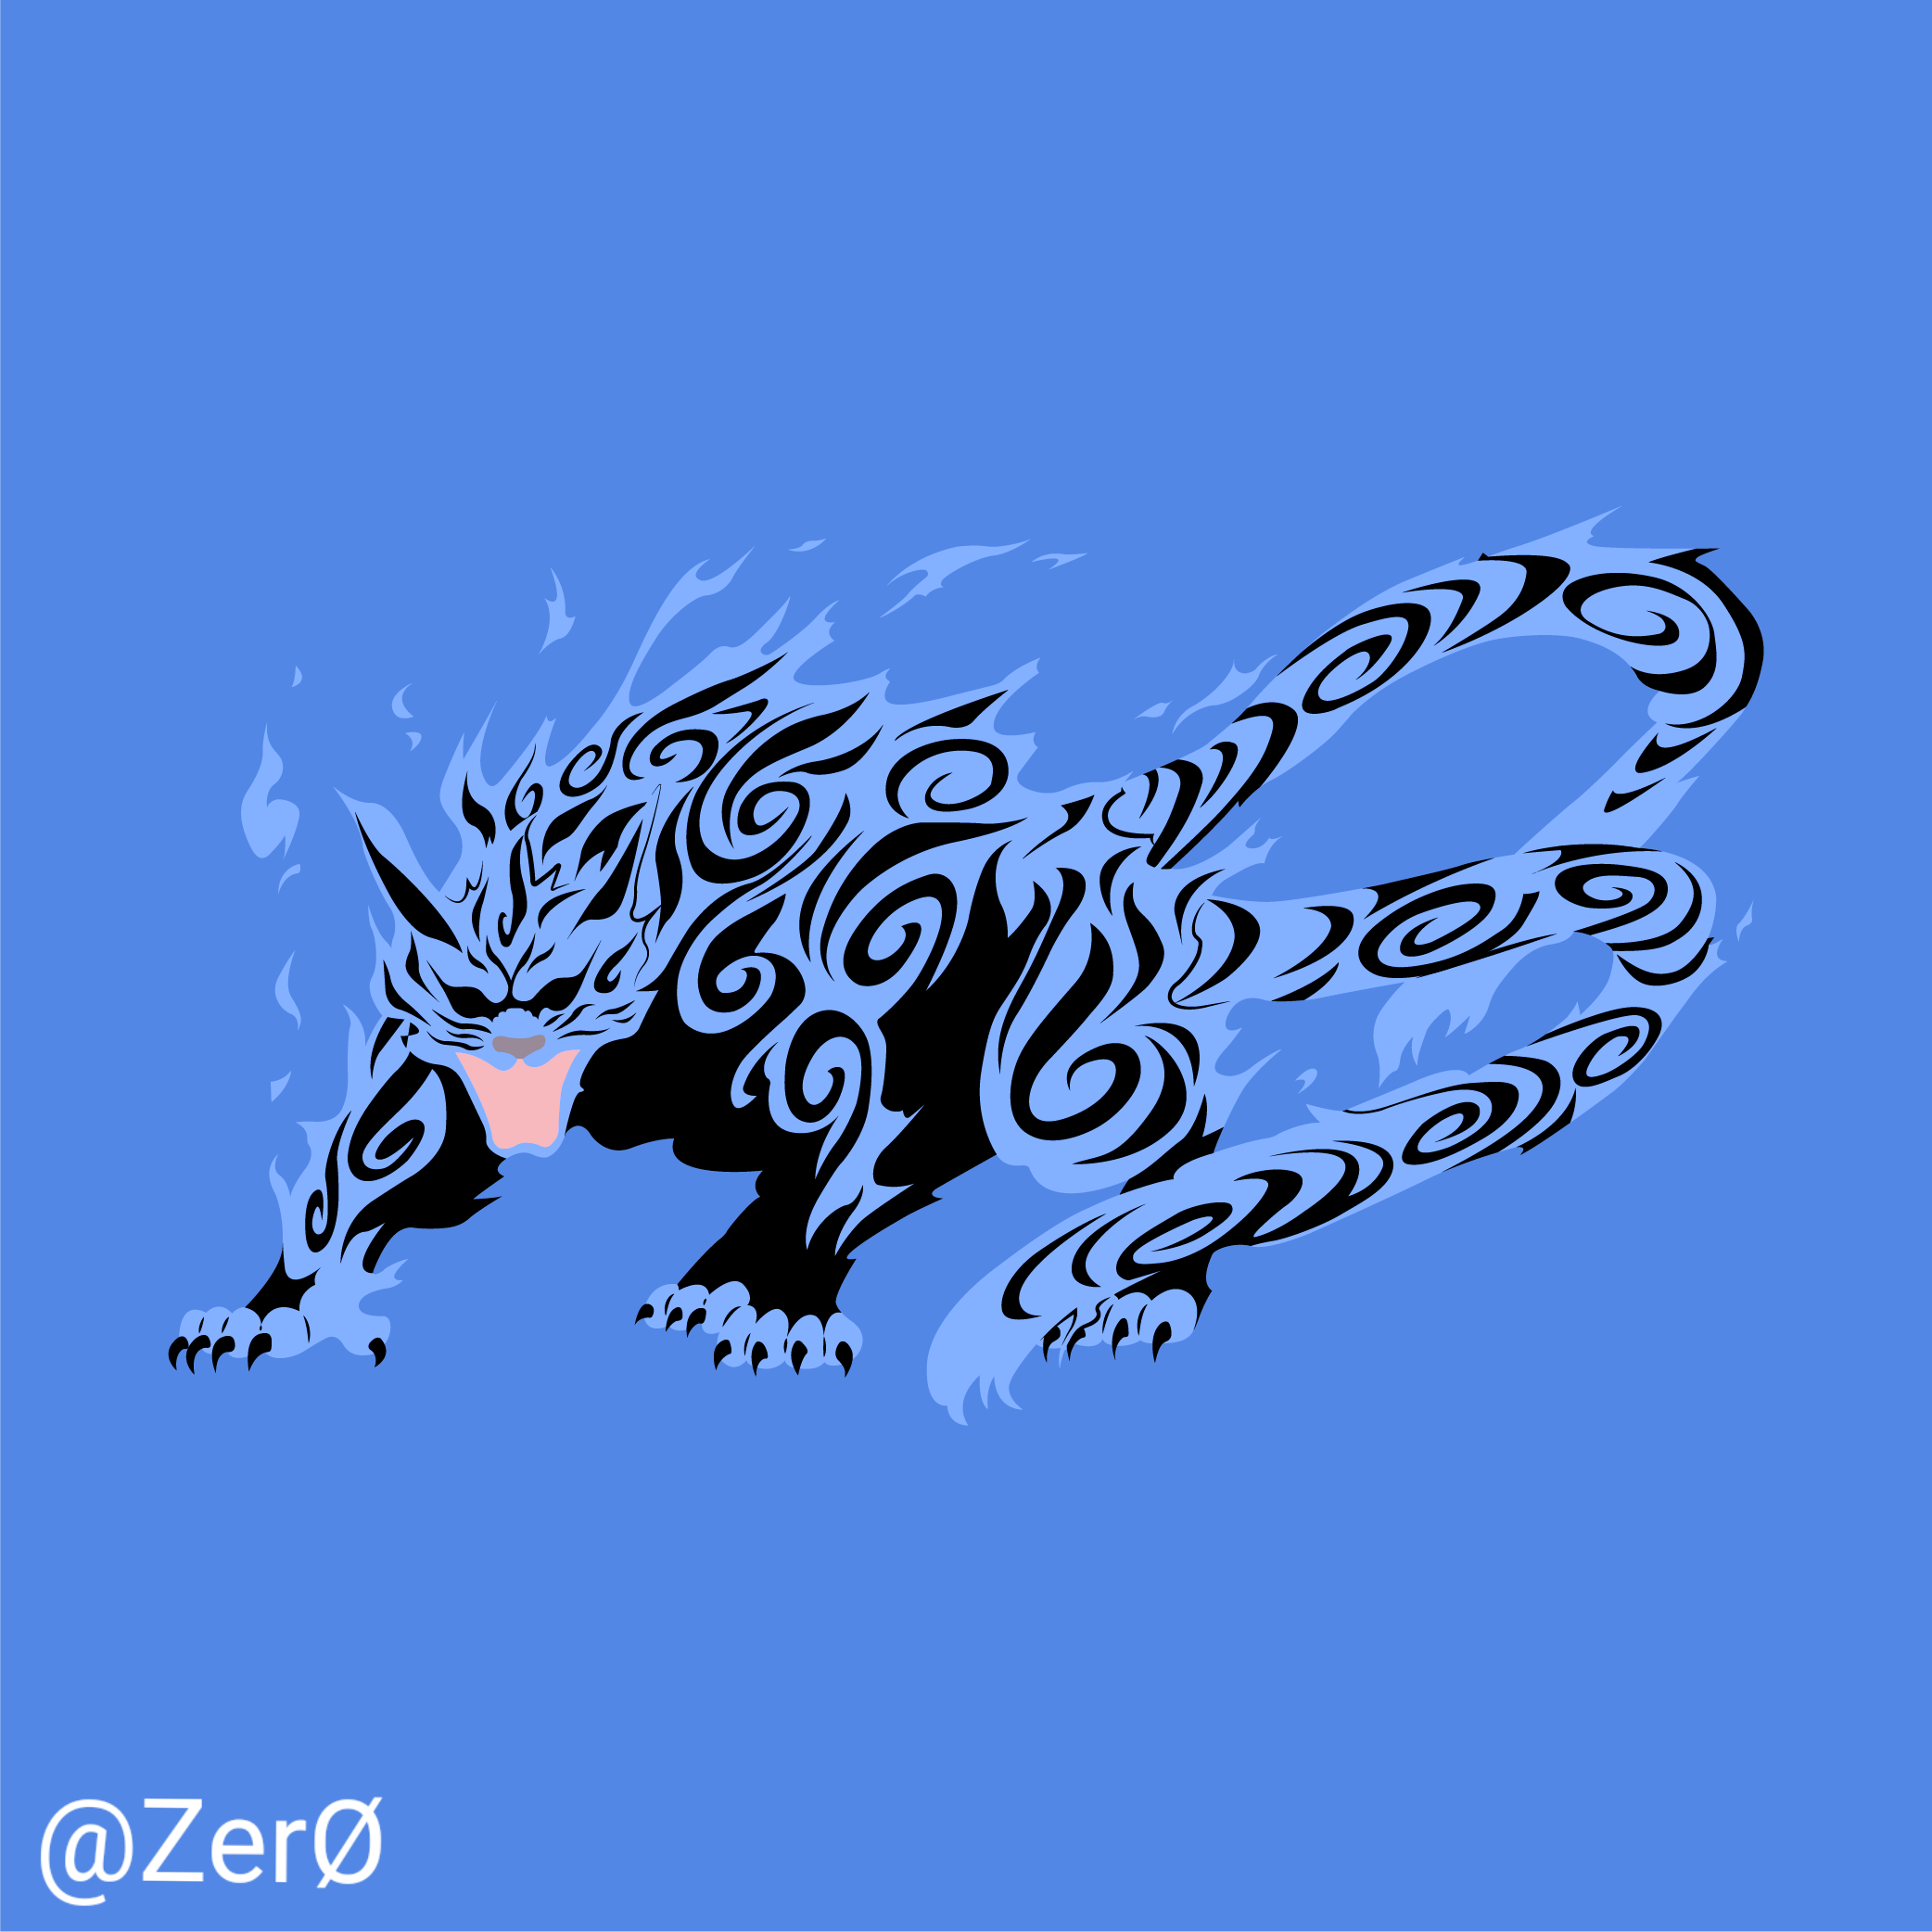 After doing Shukaku in a simplistic style, I decided to do one of Matatabi, the two tailed beast :)